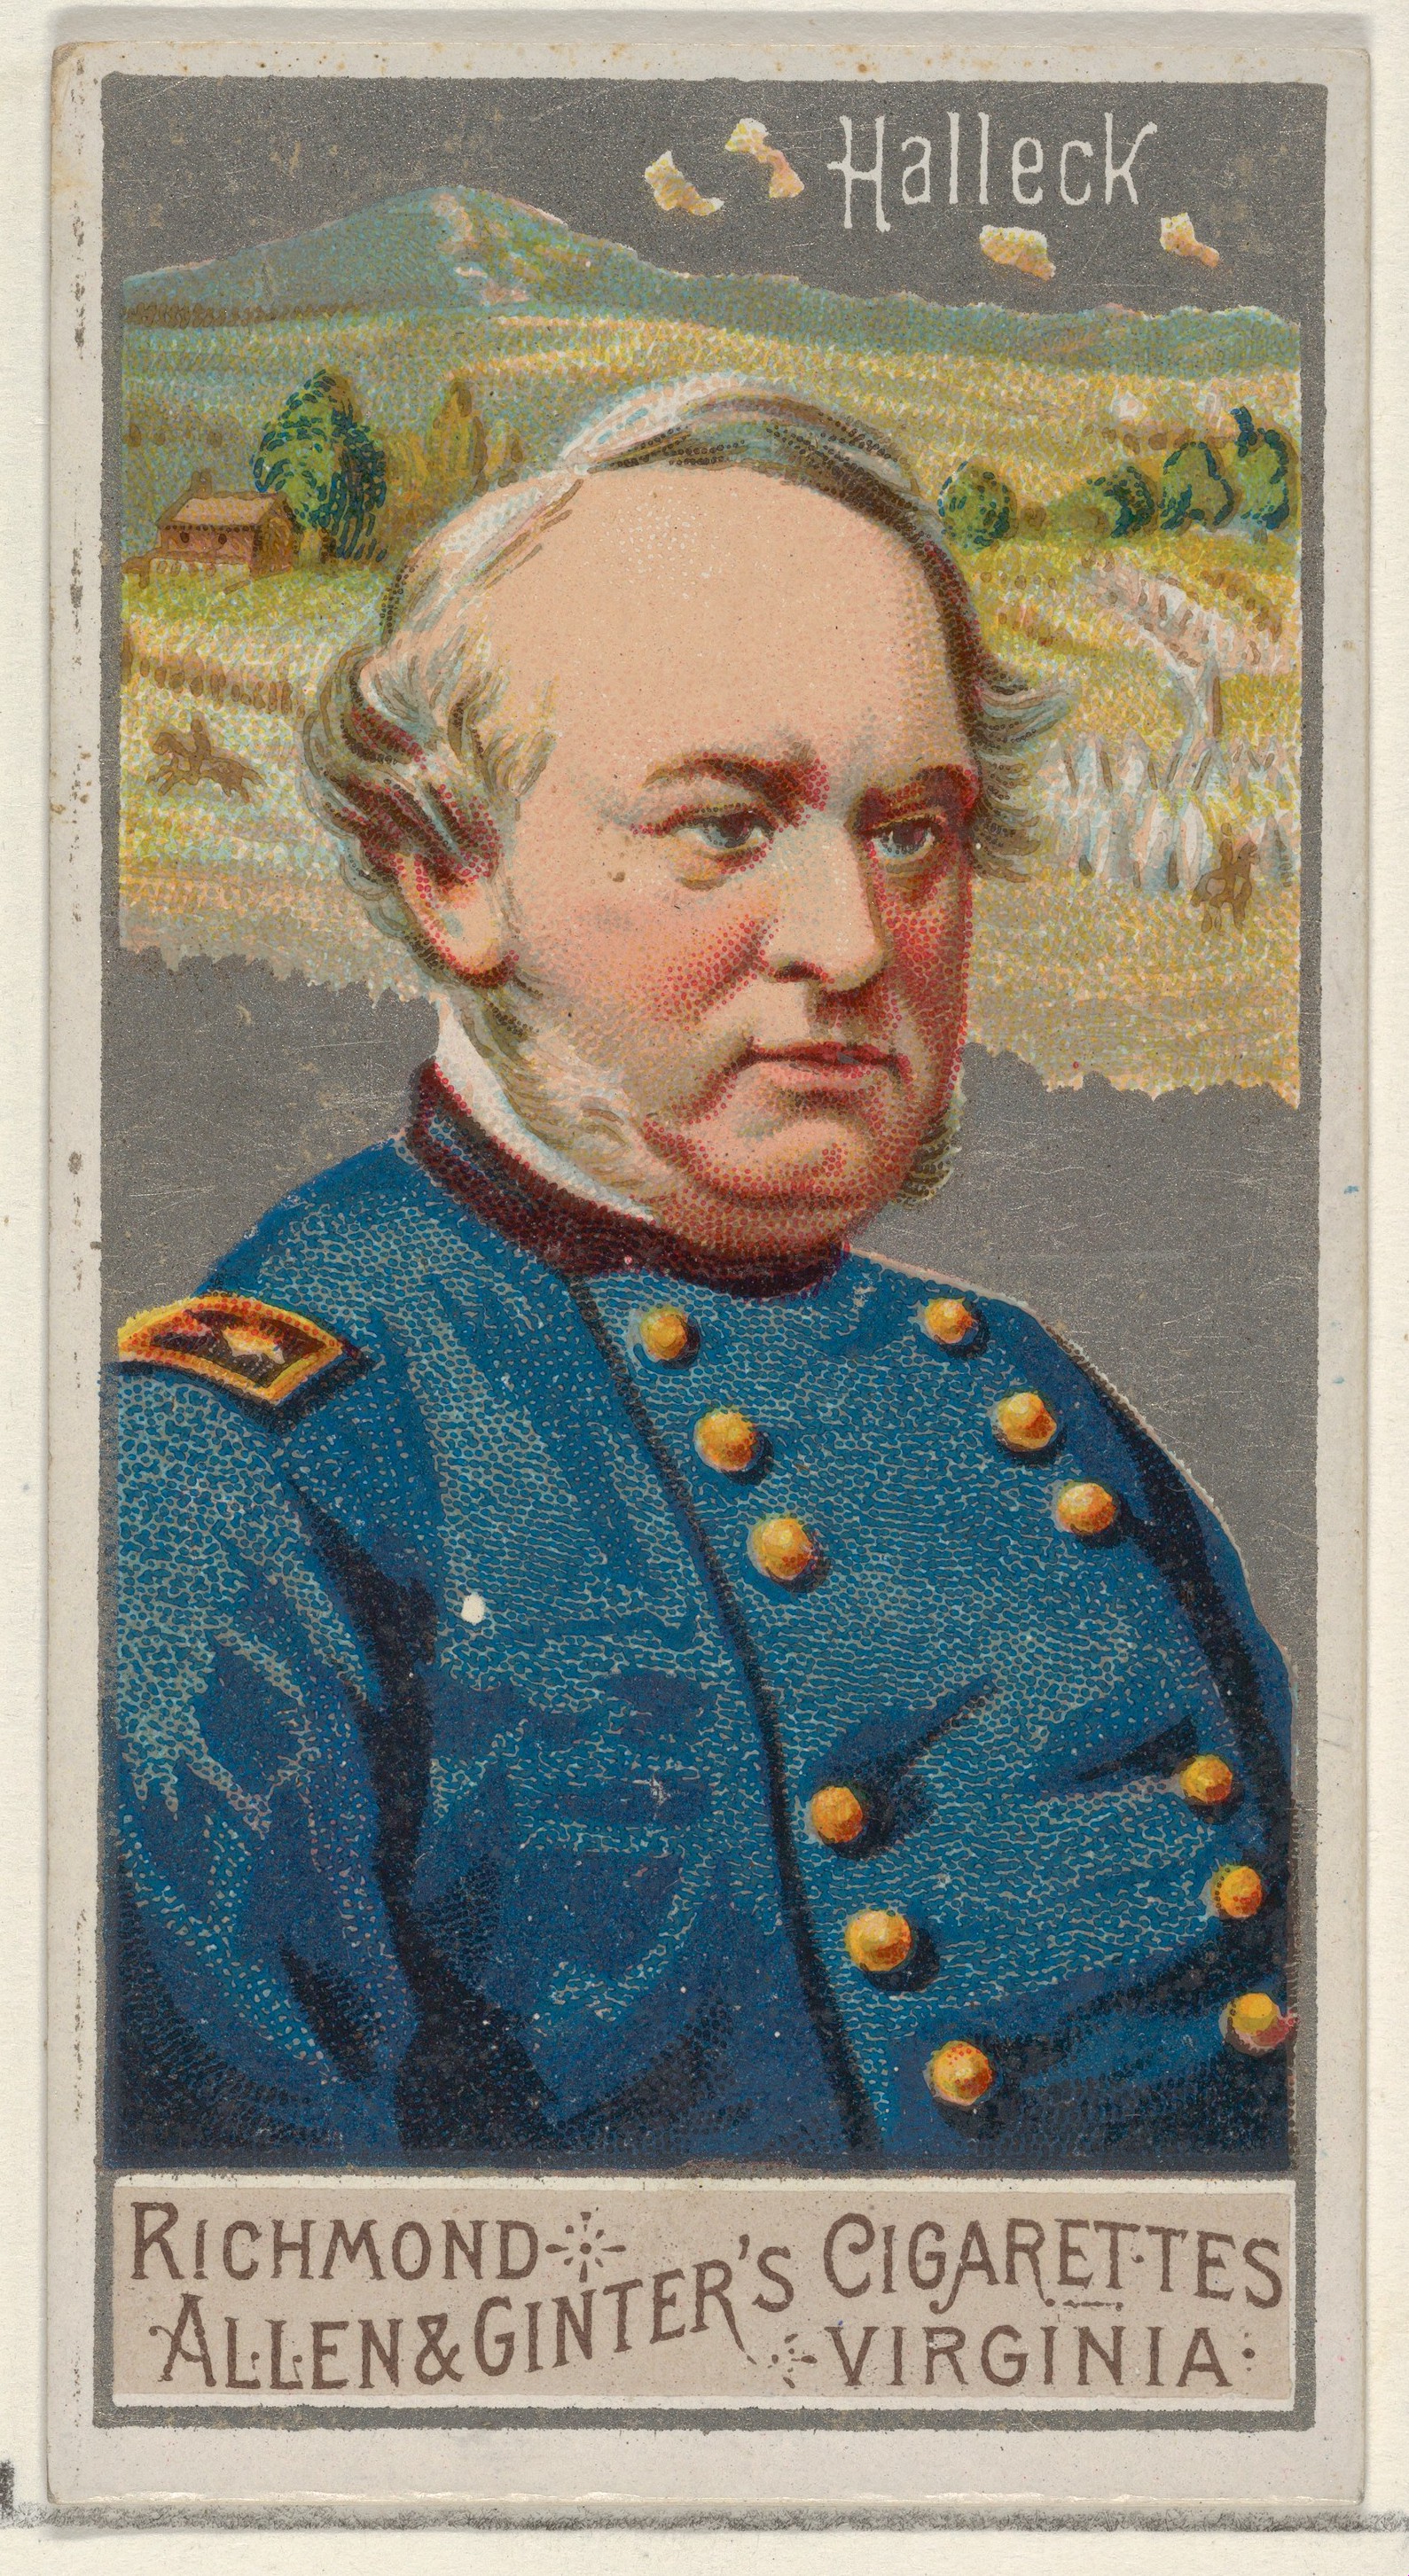 Allen & Ginter Henry Wager Halleck, from the Great Generals series